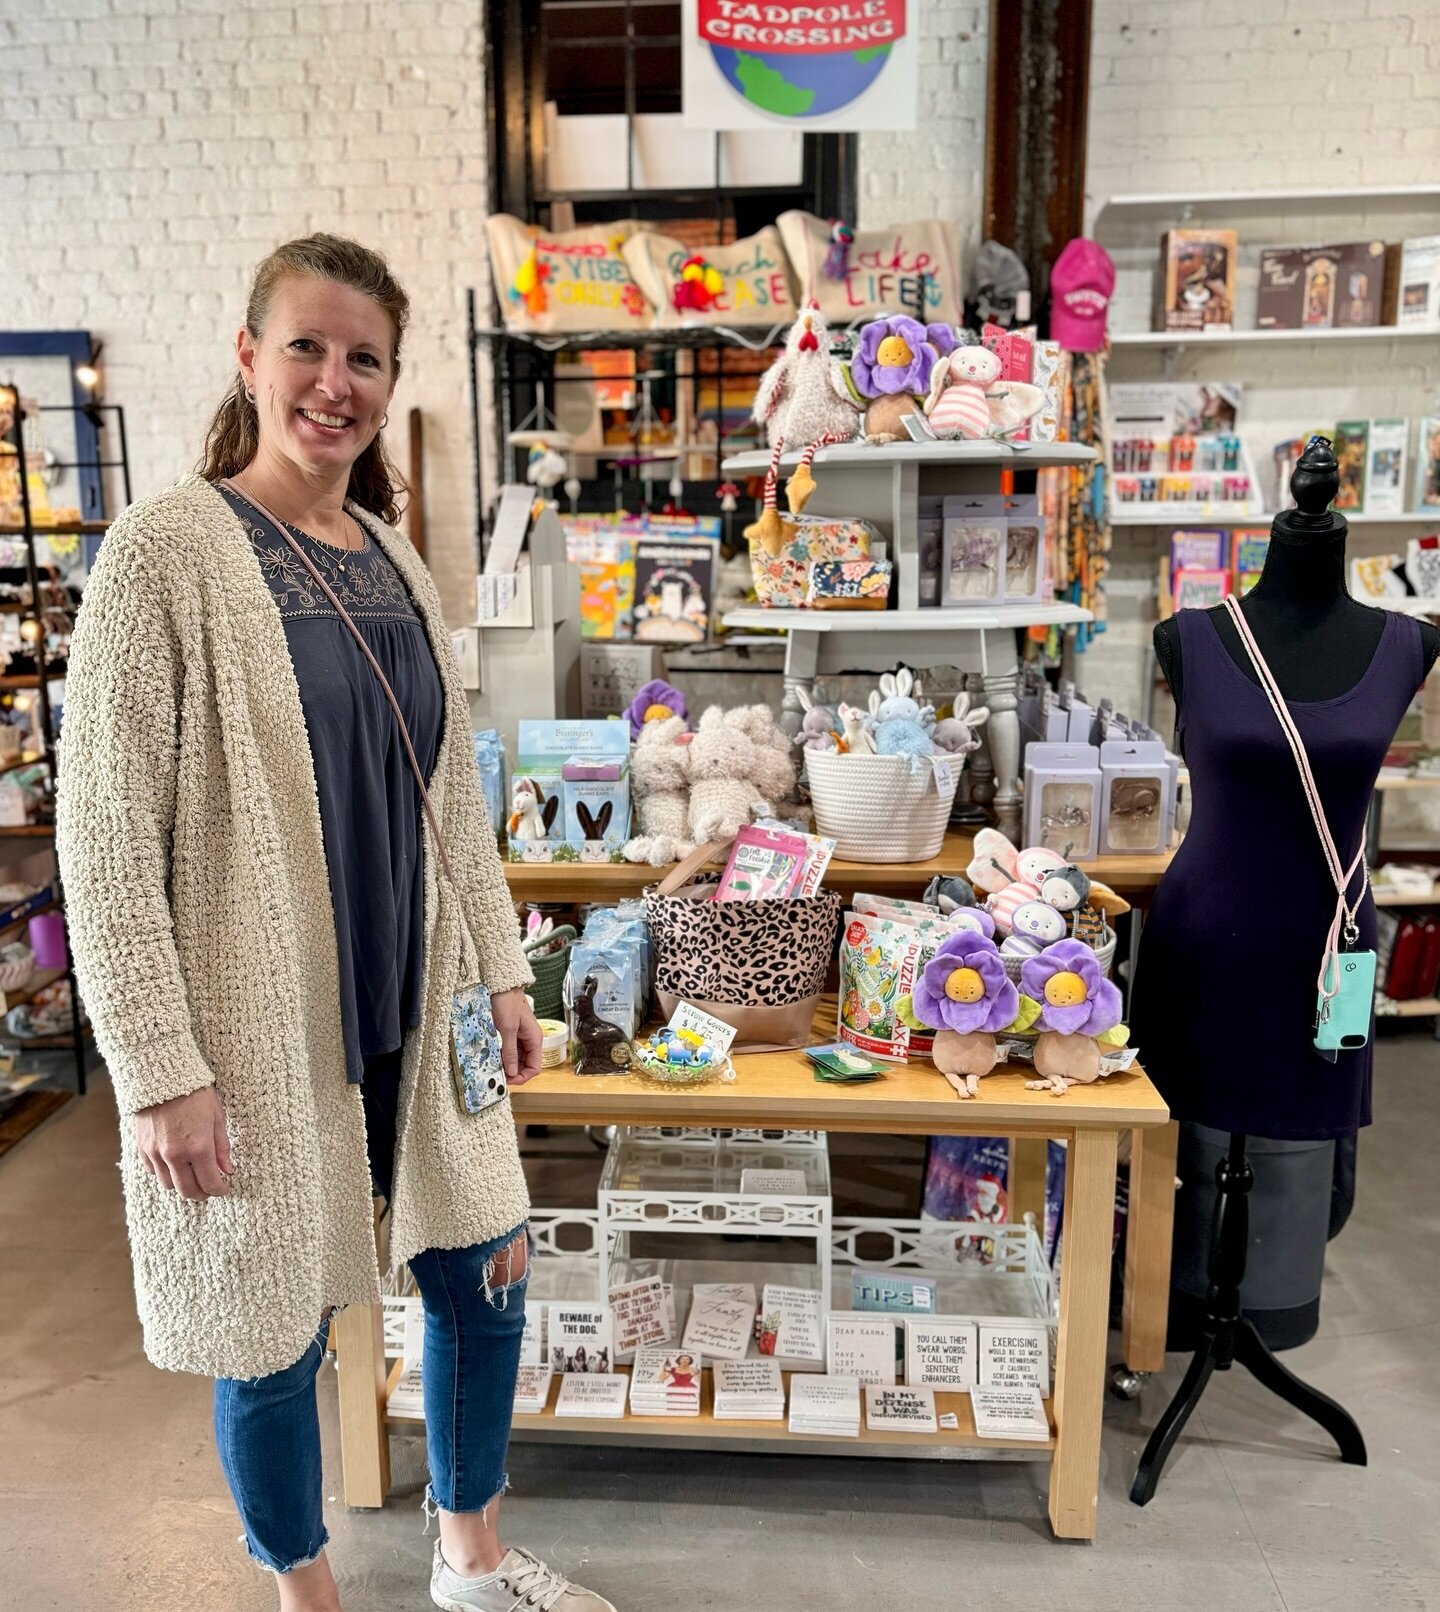 🐸 Tadpole Crossing is throwing a party! Stop by Belle Mercantile tomorrow to meet Sharon and say hello to Cathy! There will be cookies, giveaways and artisan Debra Cray of @ashlaurindesigns 👏👏

Event Details: Saturday, March 16th from 11a - 2p at 